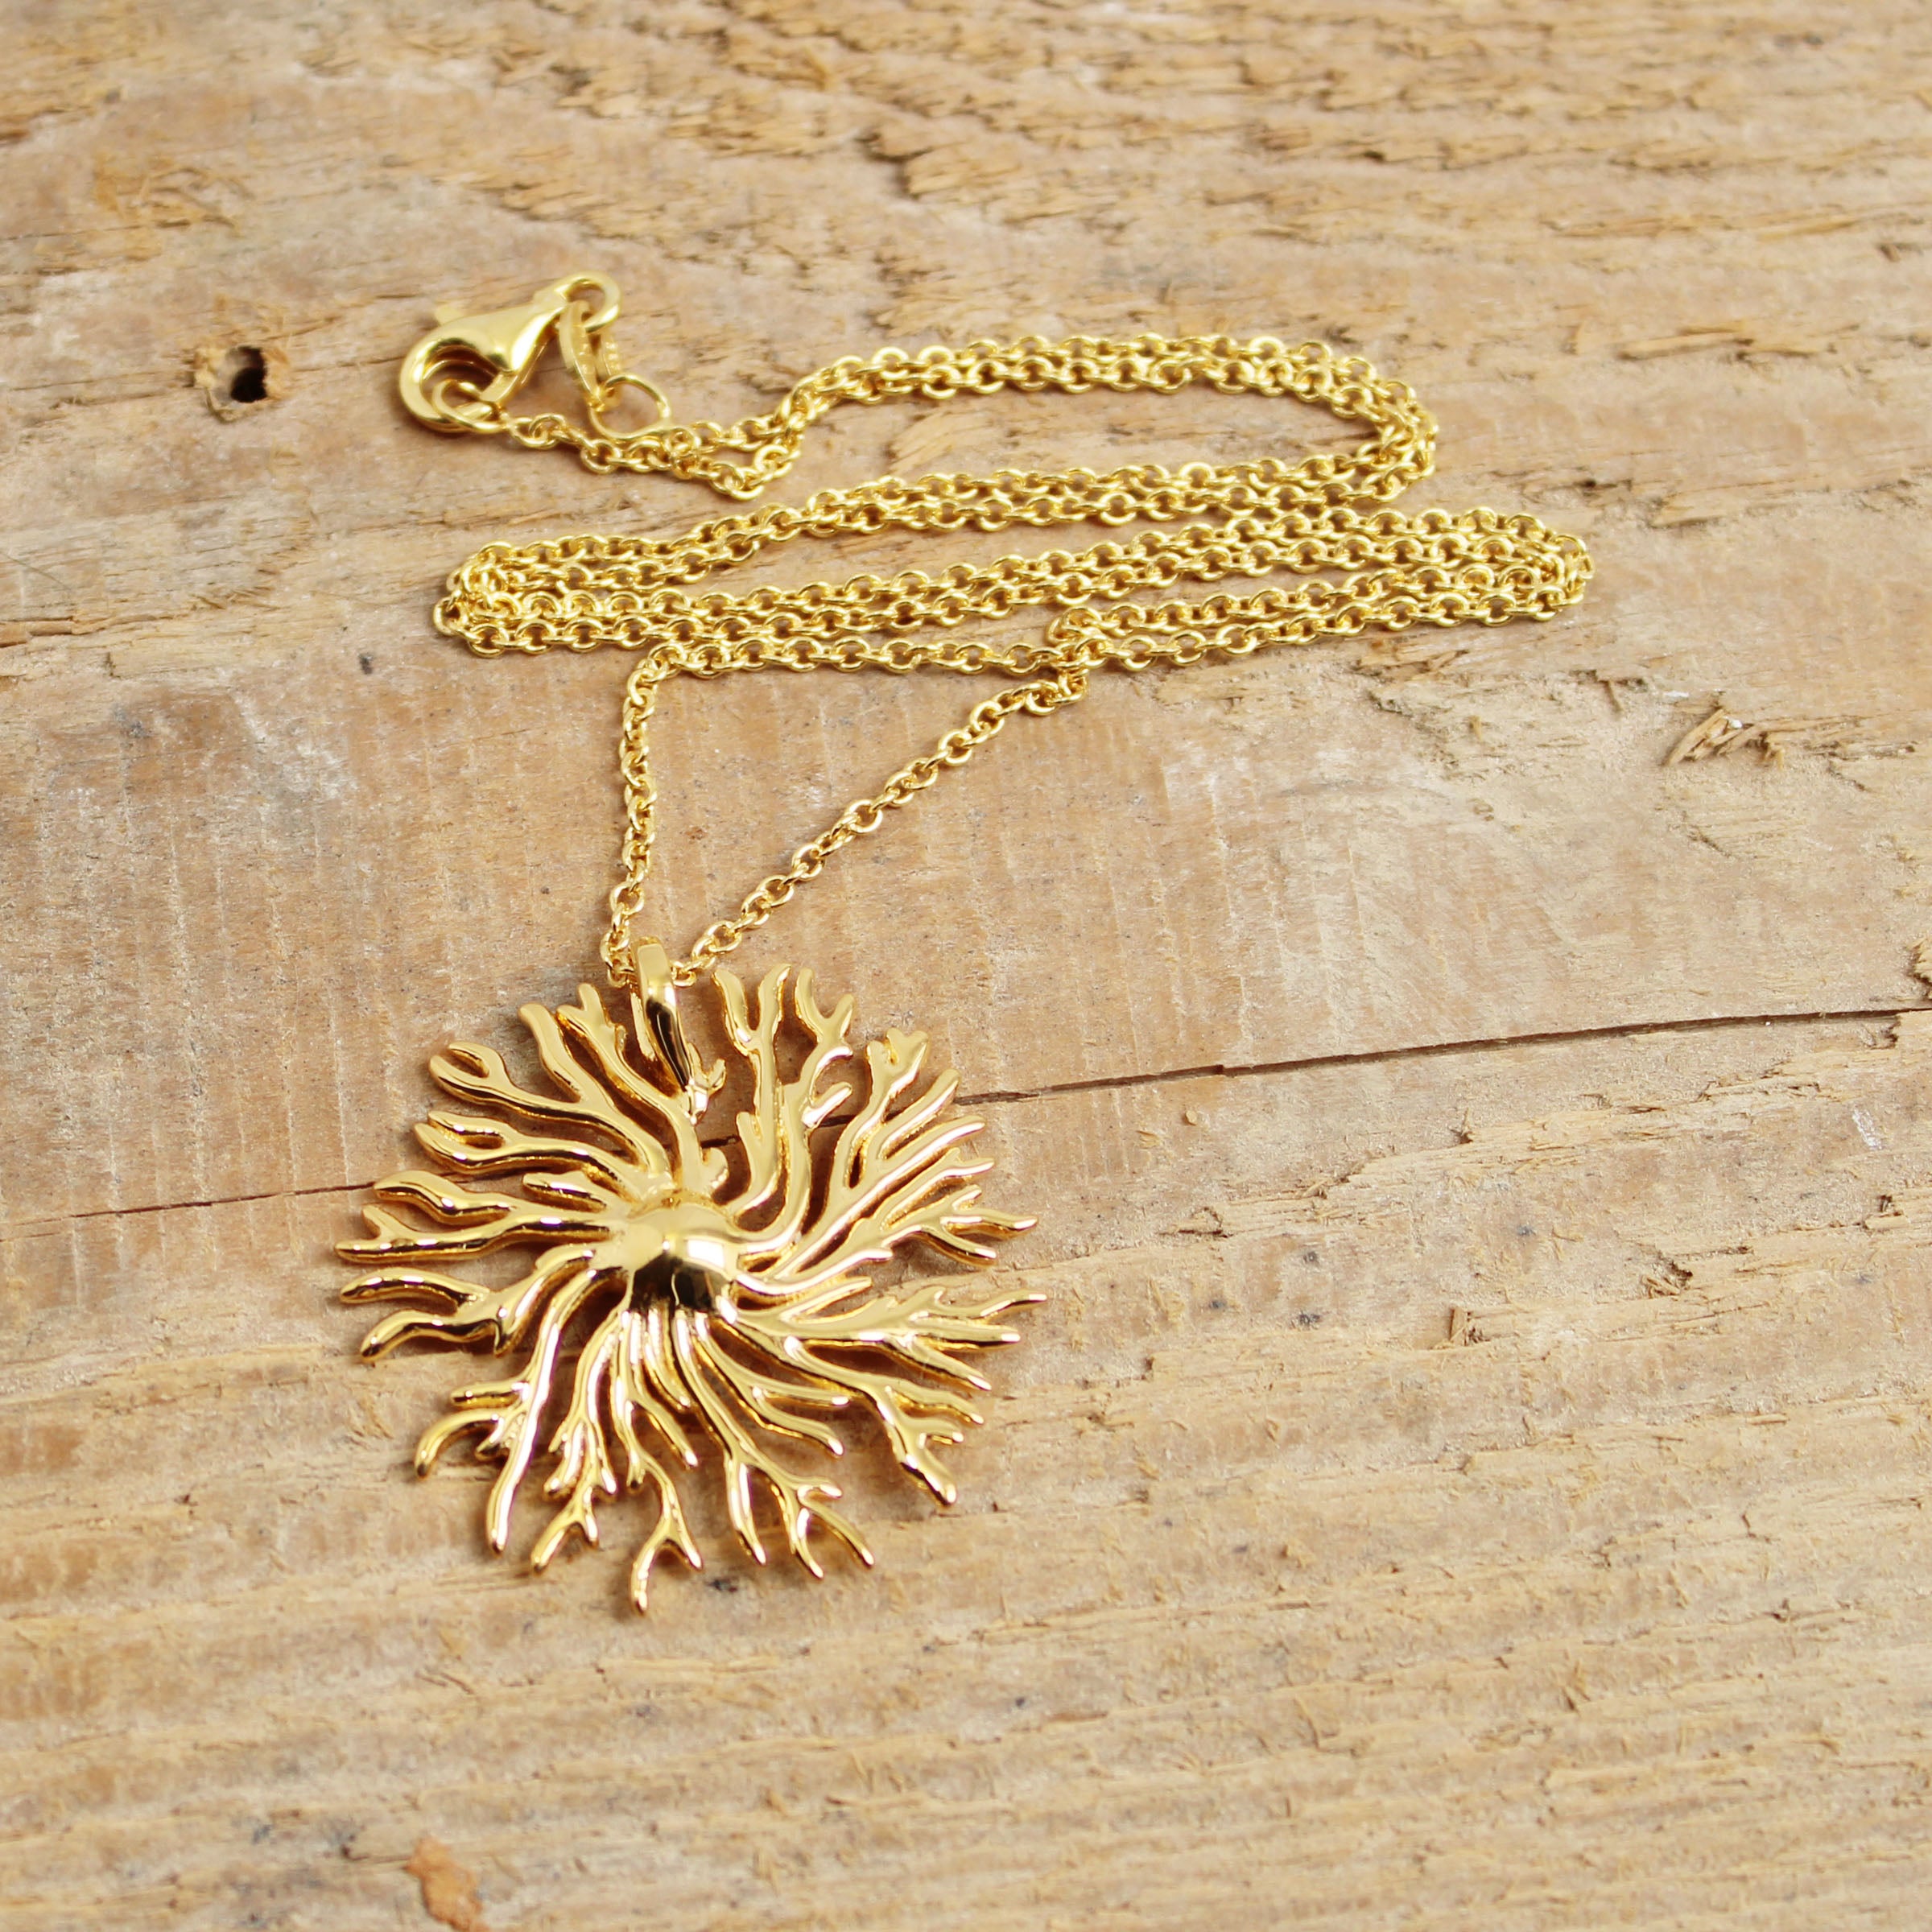 Dictyostelium slime mold pendant in 14K gold plated brass